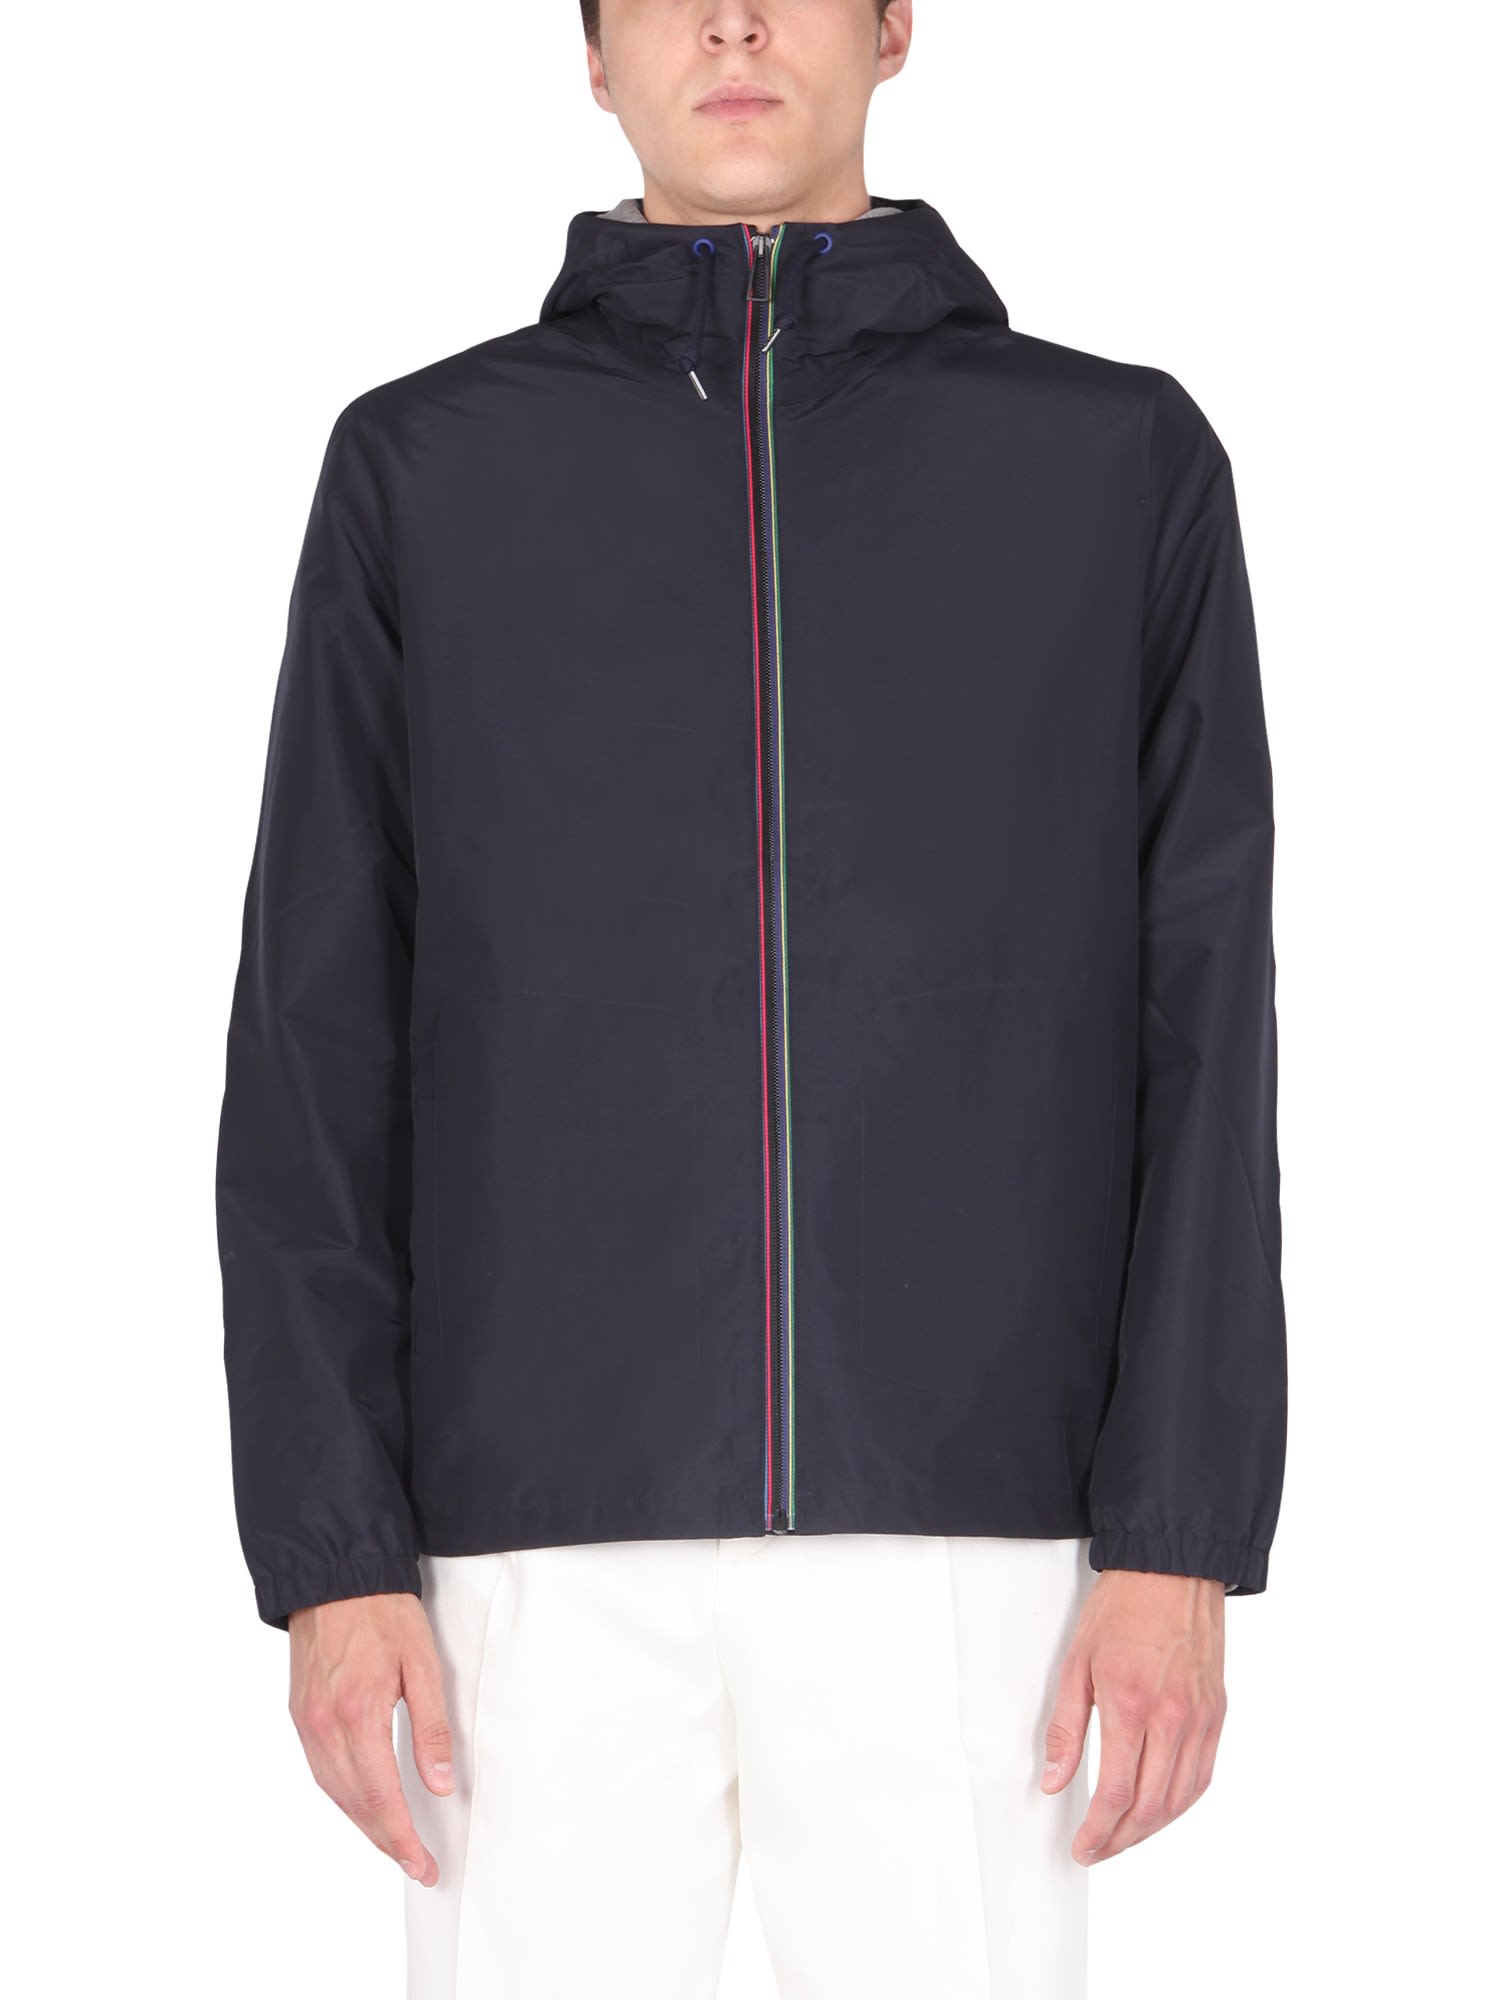 PS by Paul Smith Jacket With Zip